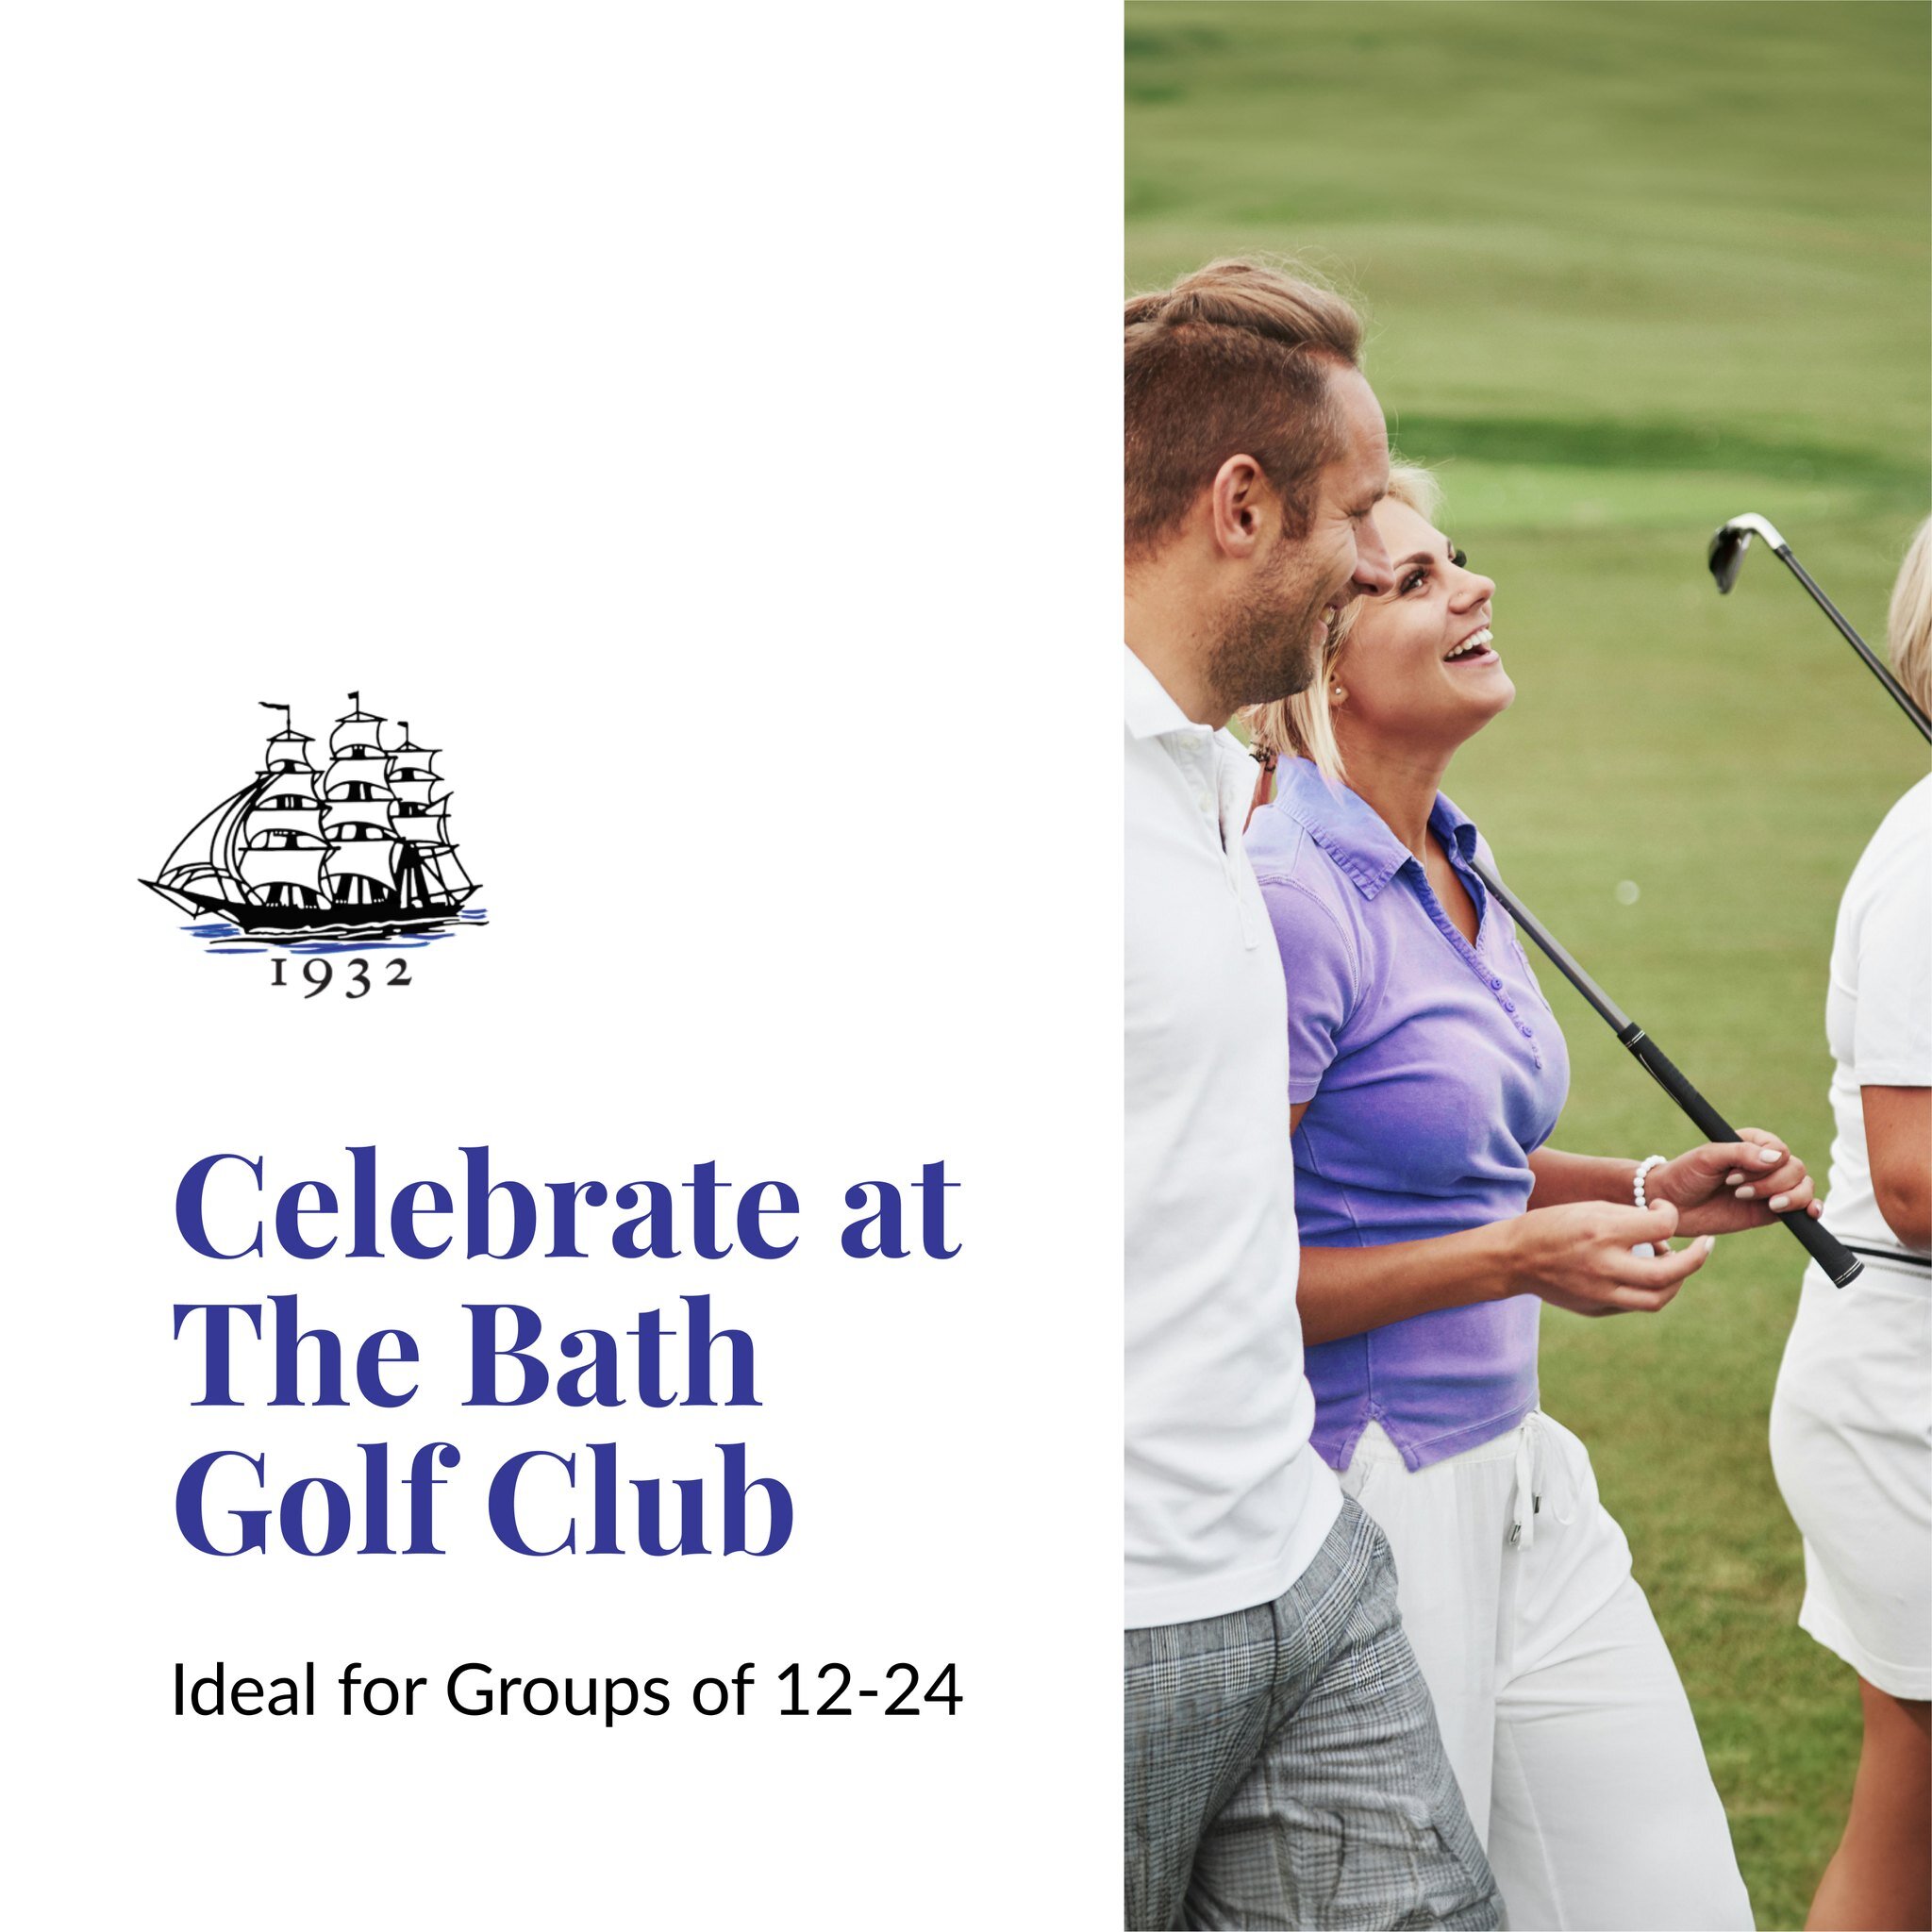 From grand corporate tournaments of 40+ to intimate gatherings of 12-24. ⛳

Discover our custom event packages today and make your next occasion unforgettable! 🏌 Our catering services by Long Reach Kitchen &amp; Catering feature fresh, locally inspi